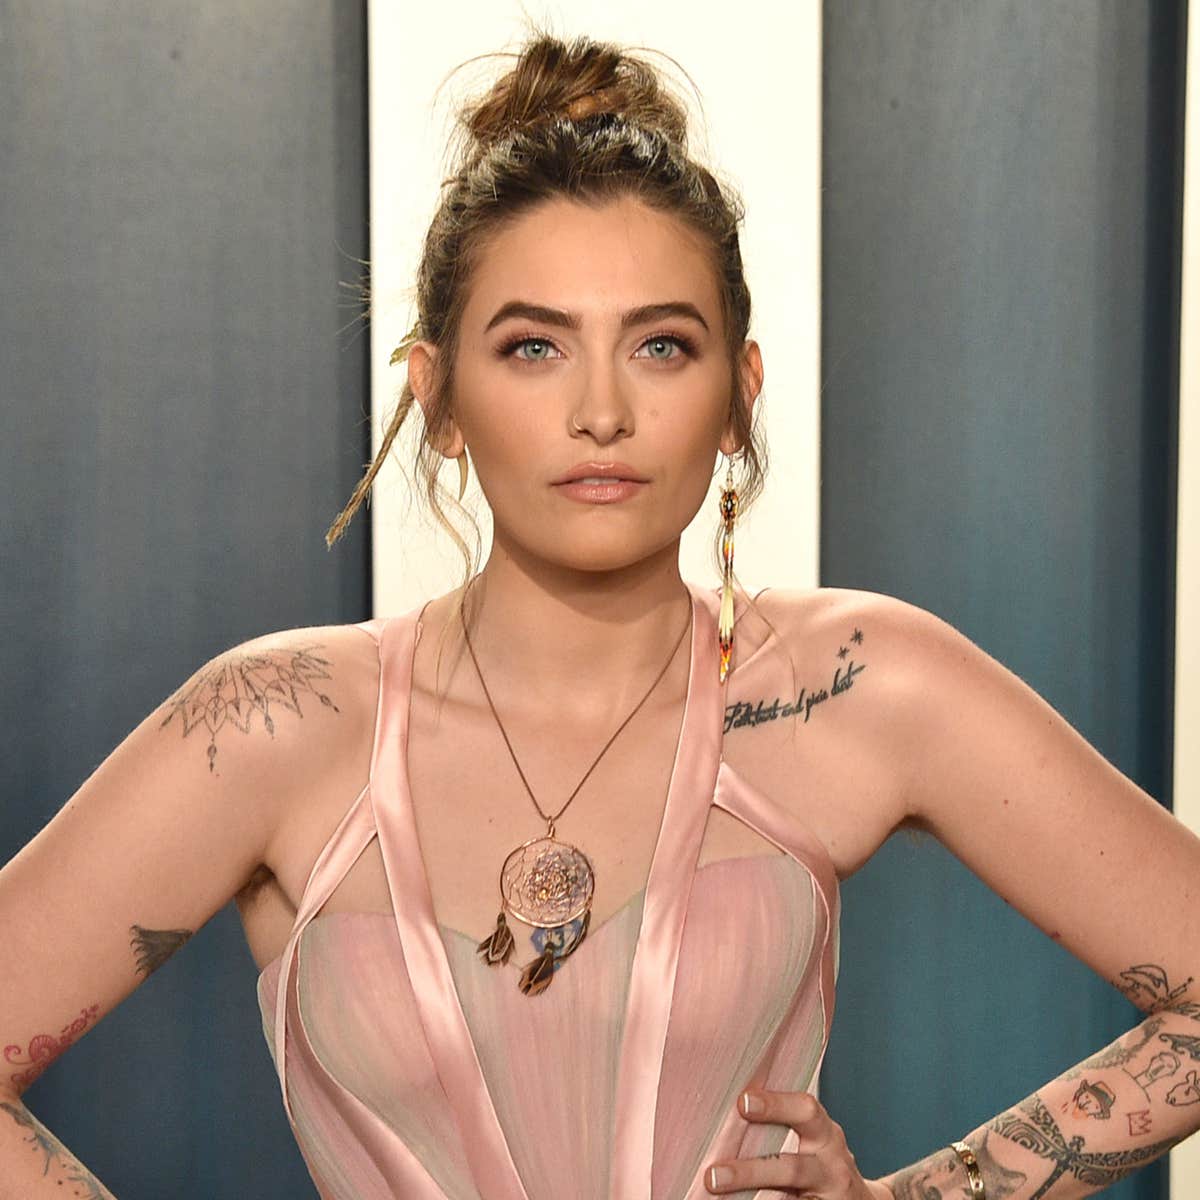 Bella Thorne Lesbian Porn - Paris Jackson To Play Jesus In Controversial Project